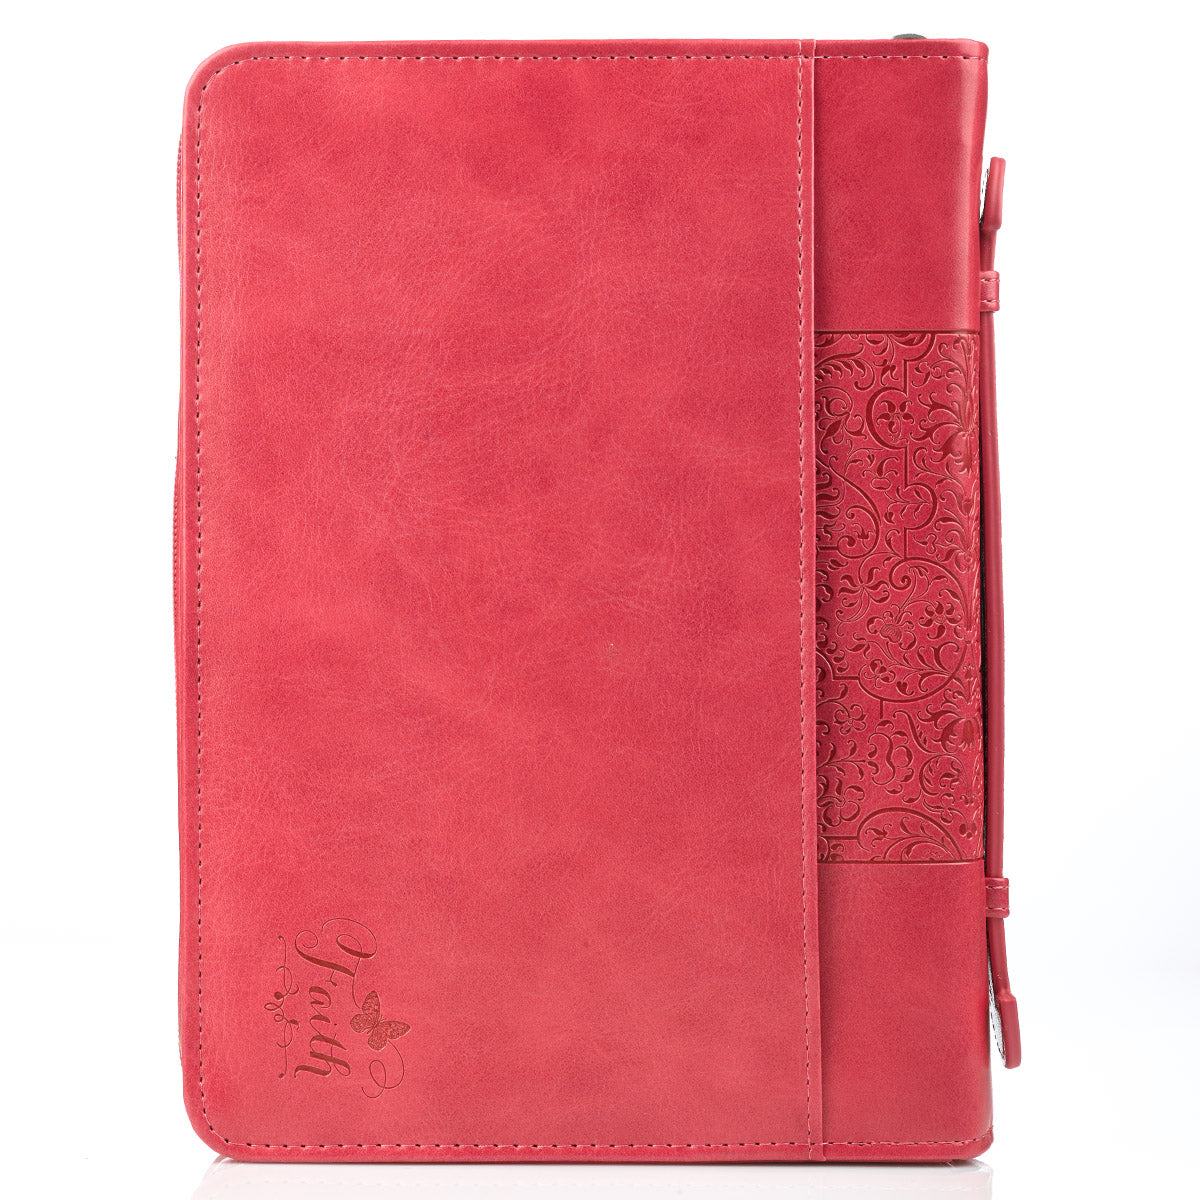 Image of Faith Pink Faux Leather Fashion Bible Cover - Hebrews 11:1 other